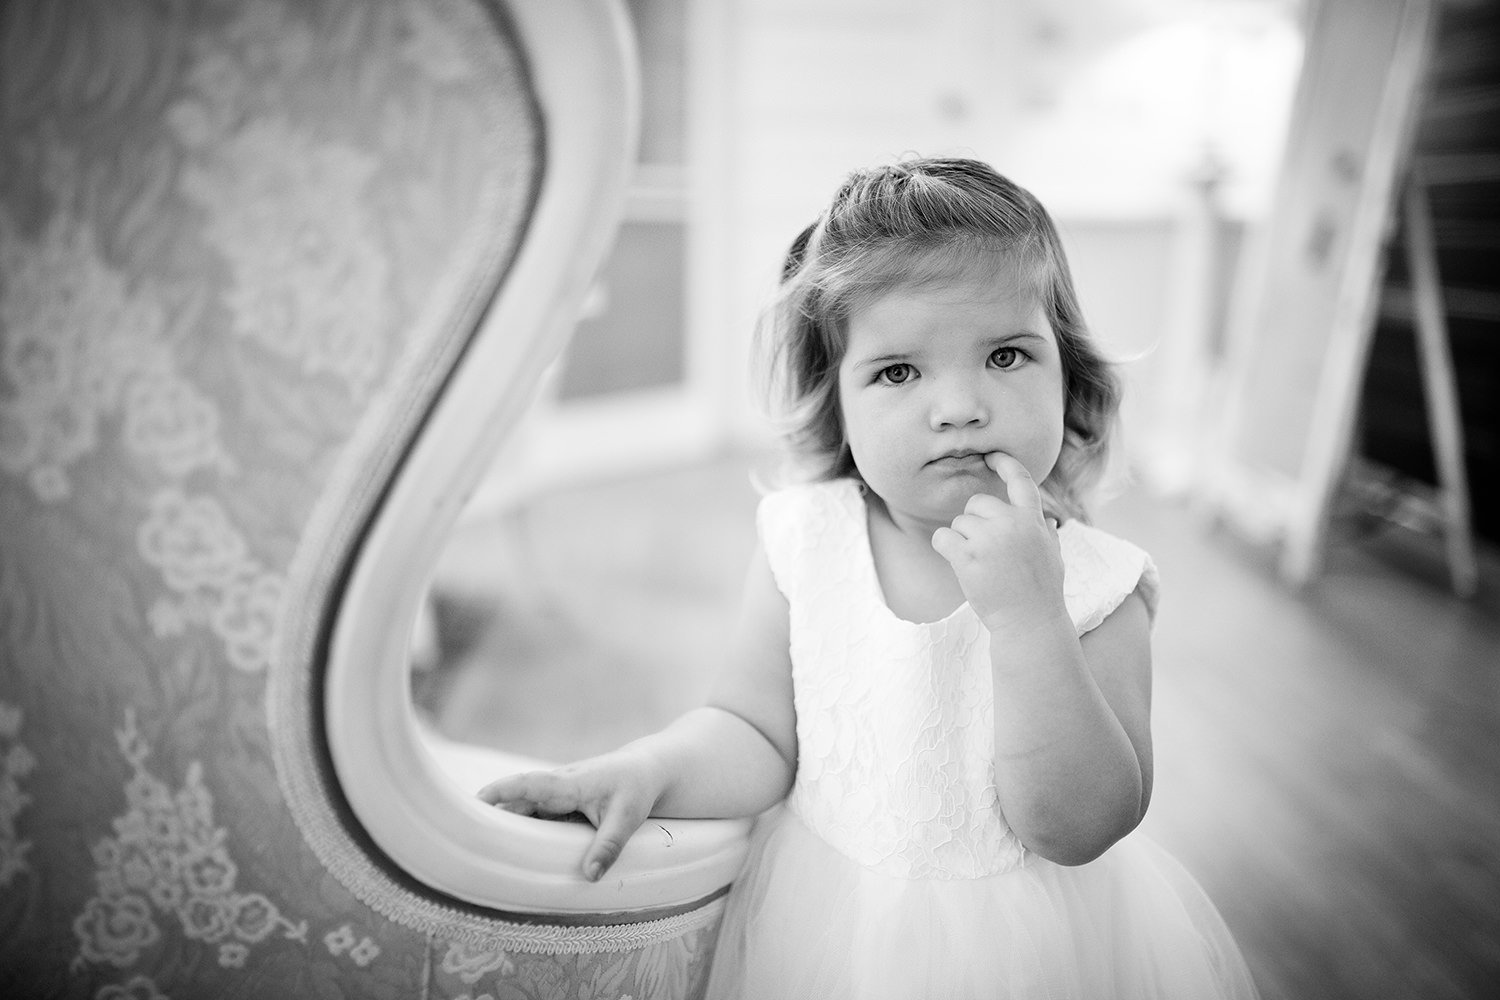 The cutest flower-girl you will ever see